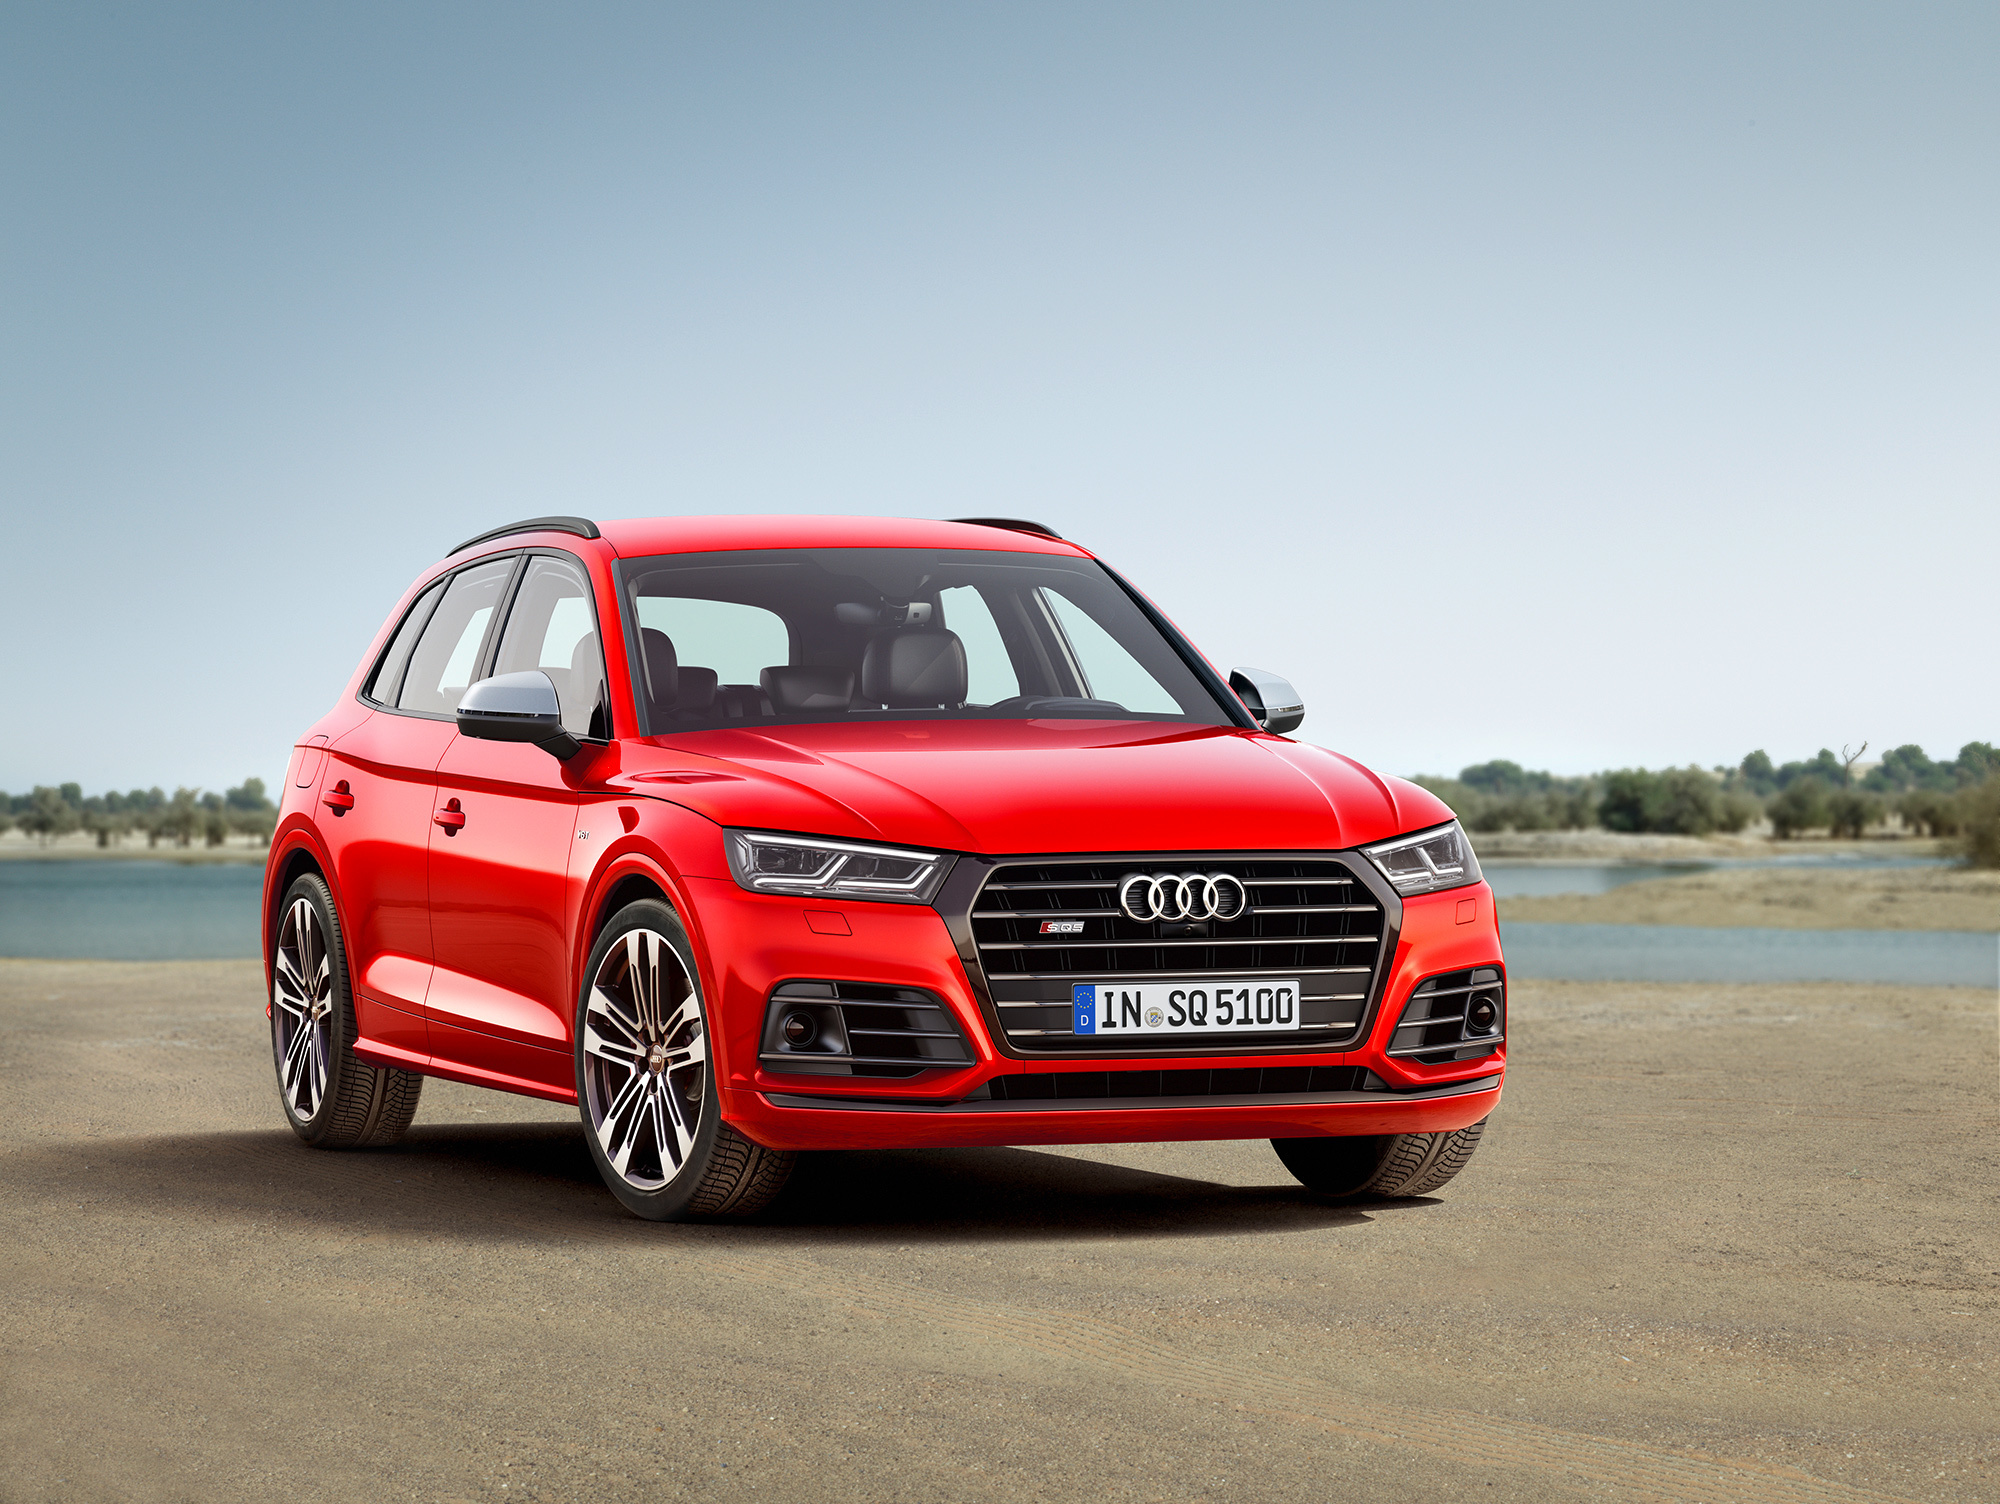 Audi Sq5 Wallpaper Image Photos Pictures Background